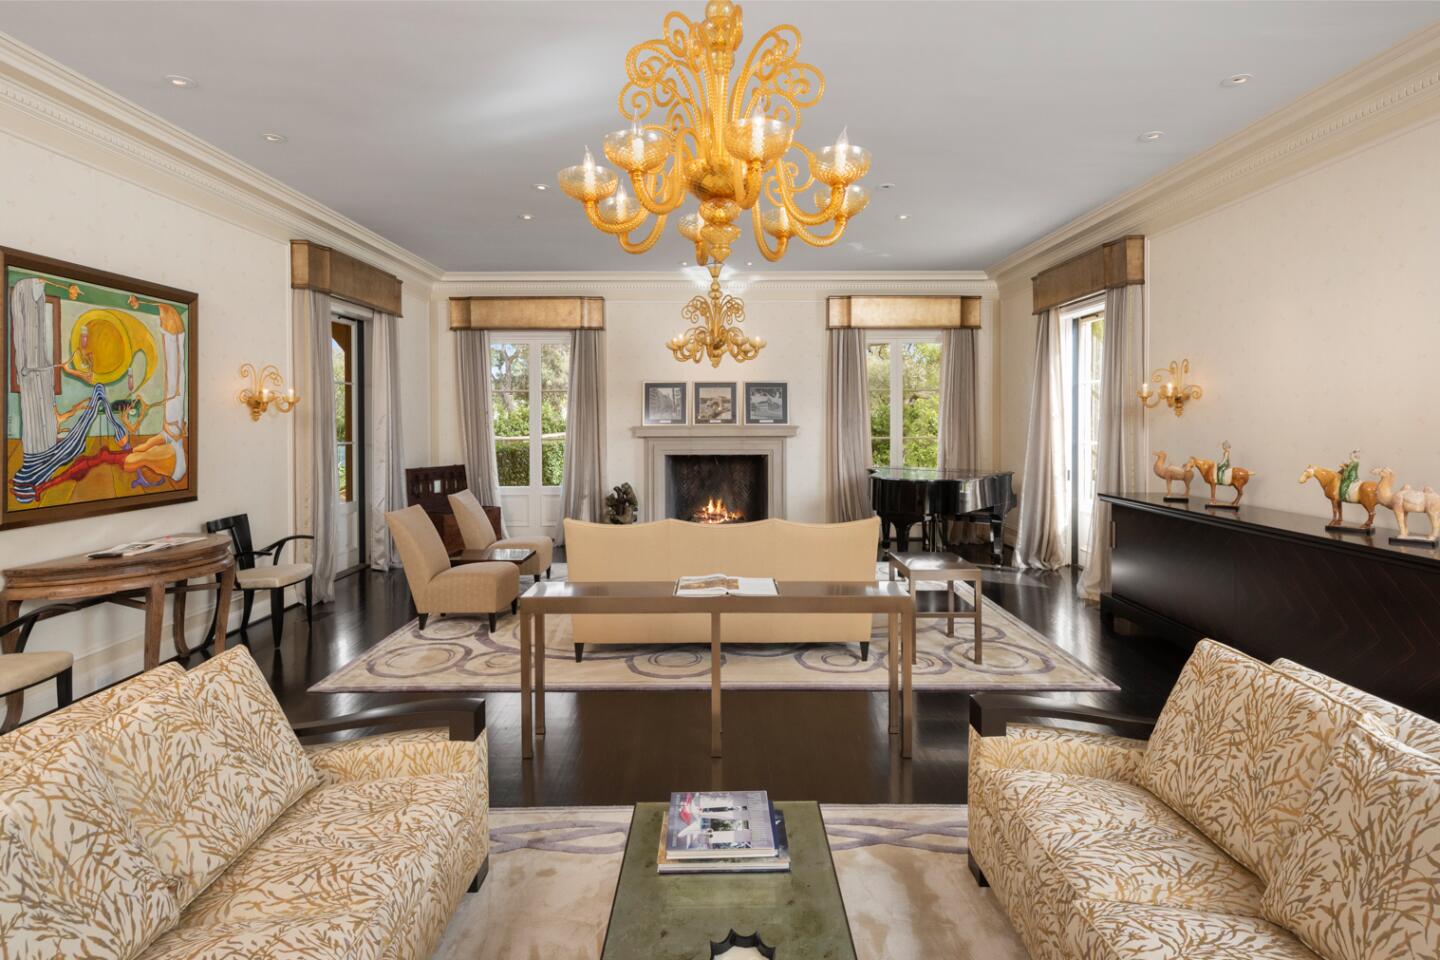 A rectangular room with two sitting areas, a fireplace and a chandelier.